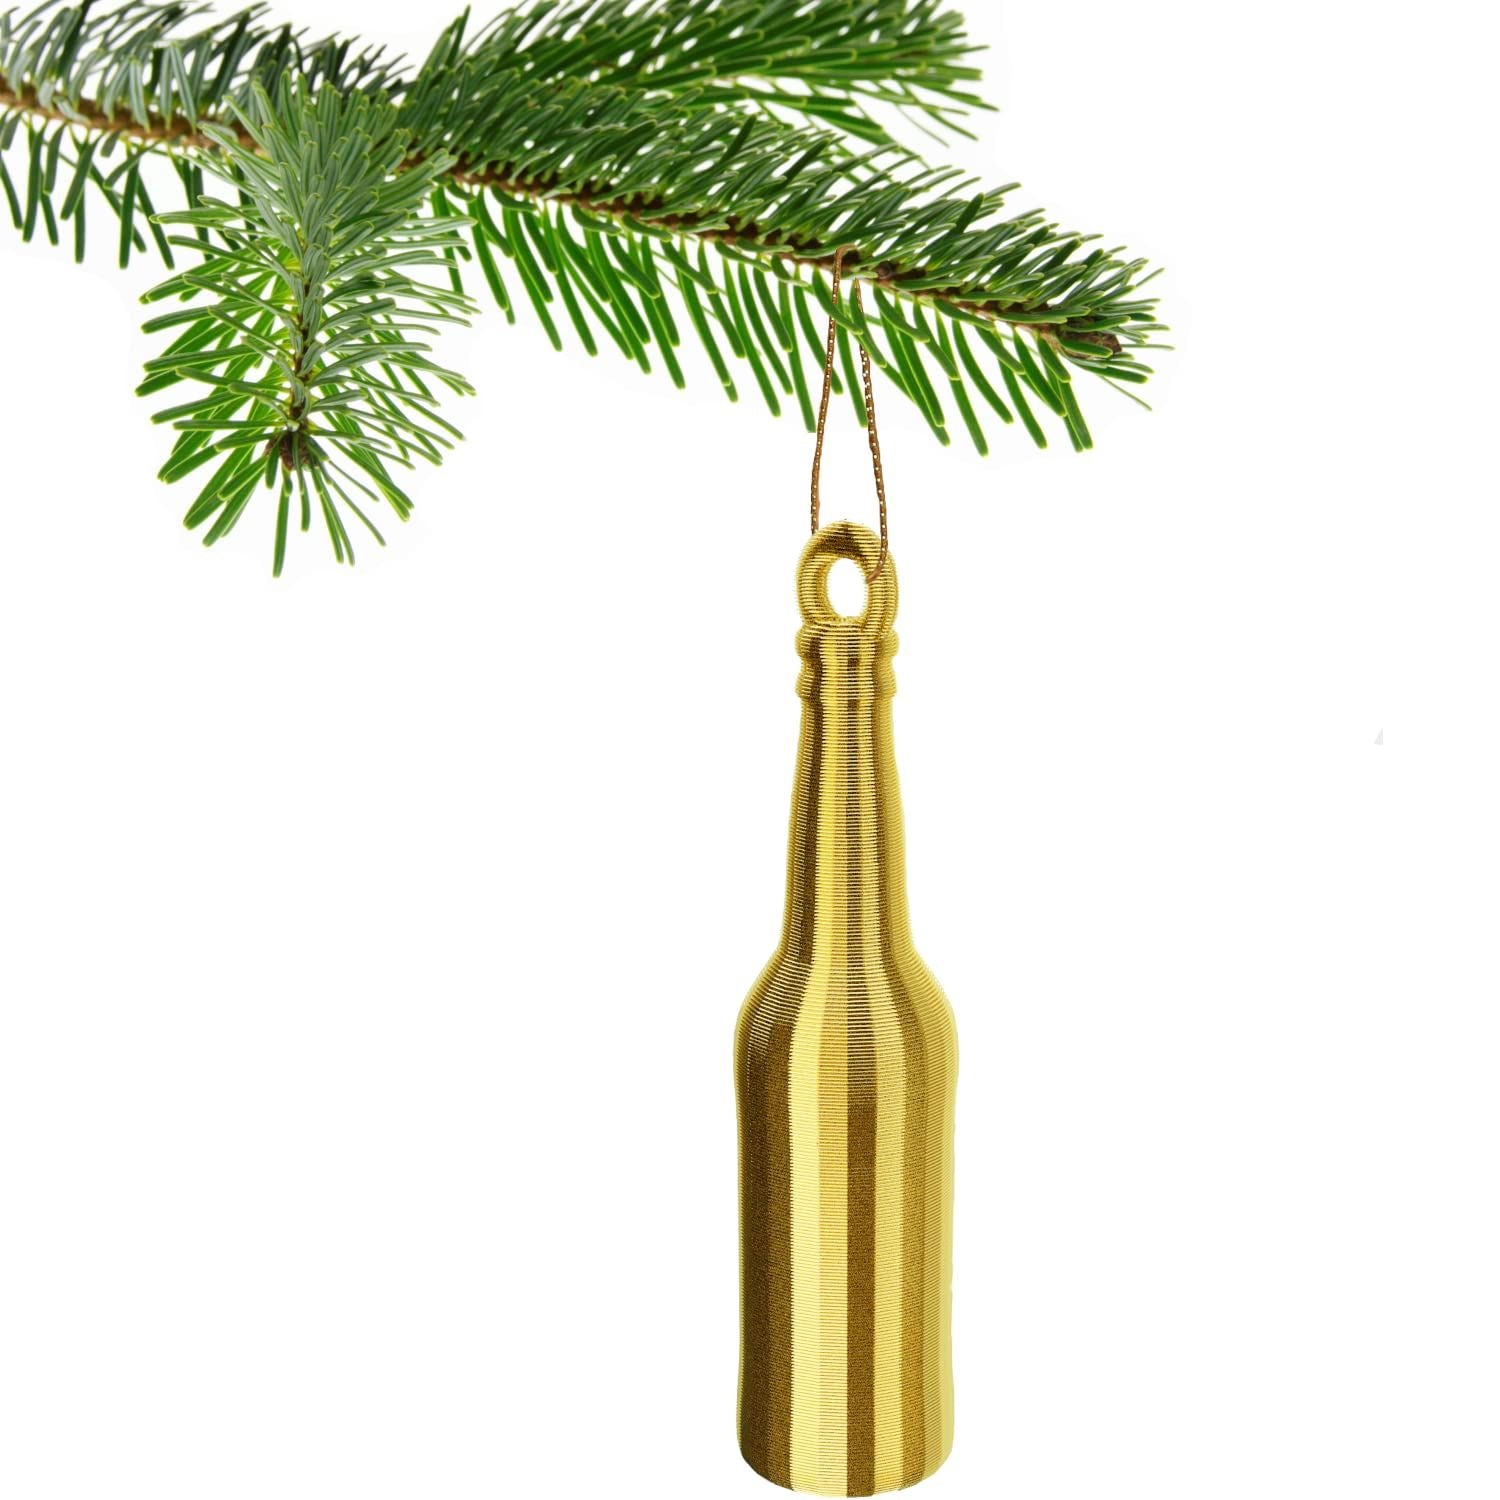 Beer Bottle Christmas Tree Bauble Decoration Ornament For Christmas Xmas Noel